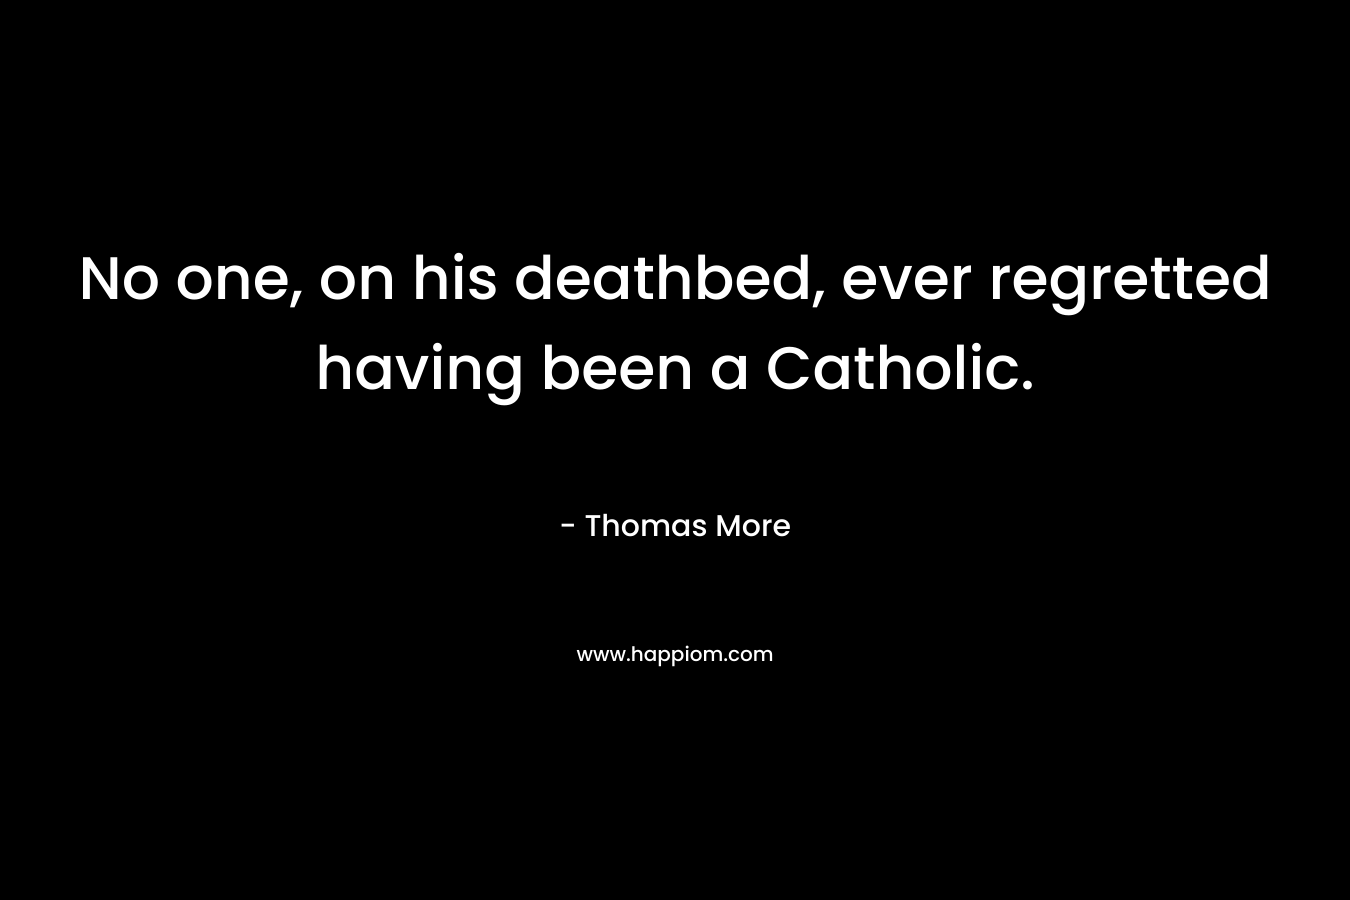 No one, on his deathbed, ever regretted having been a Catholic. – Thomas More